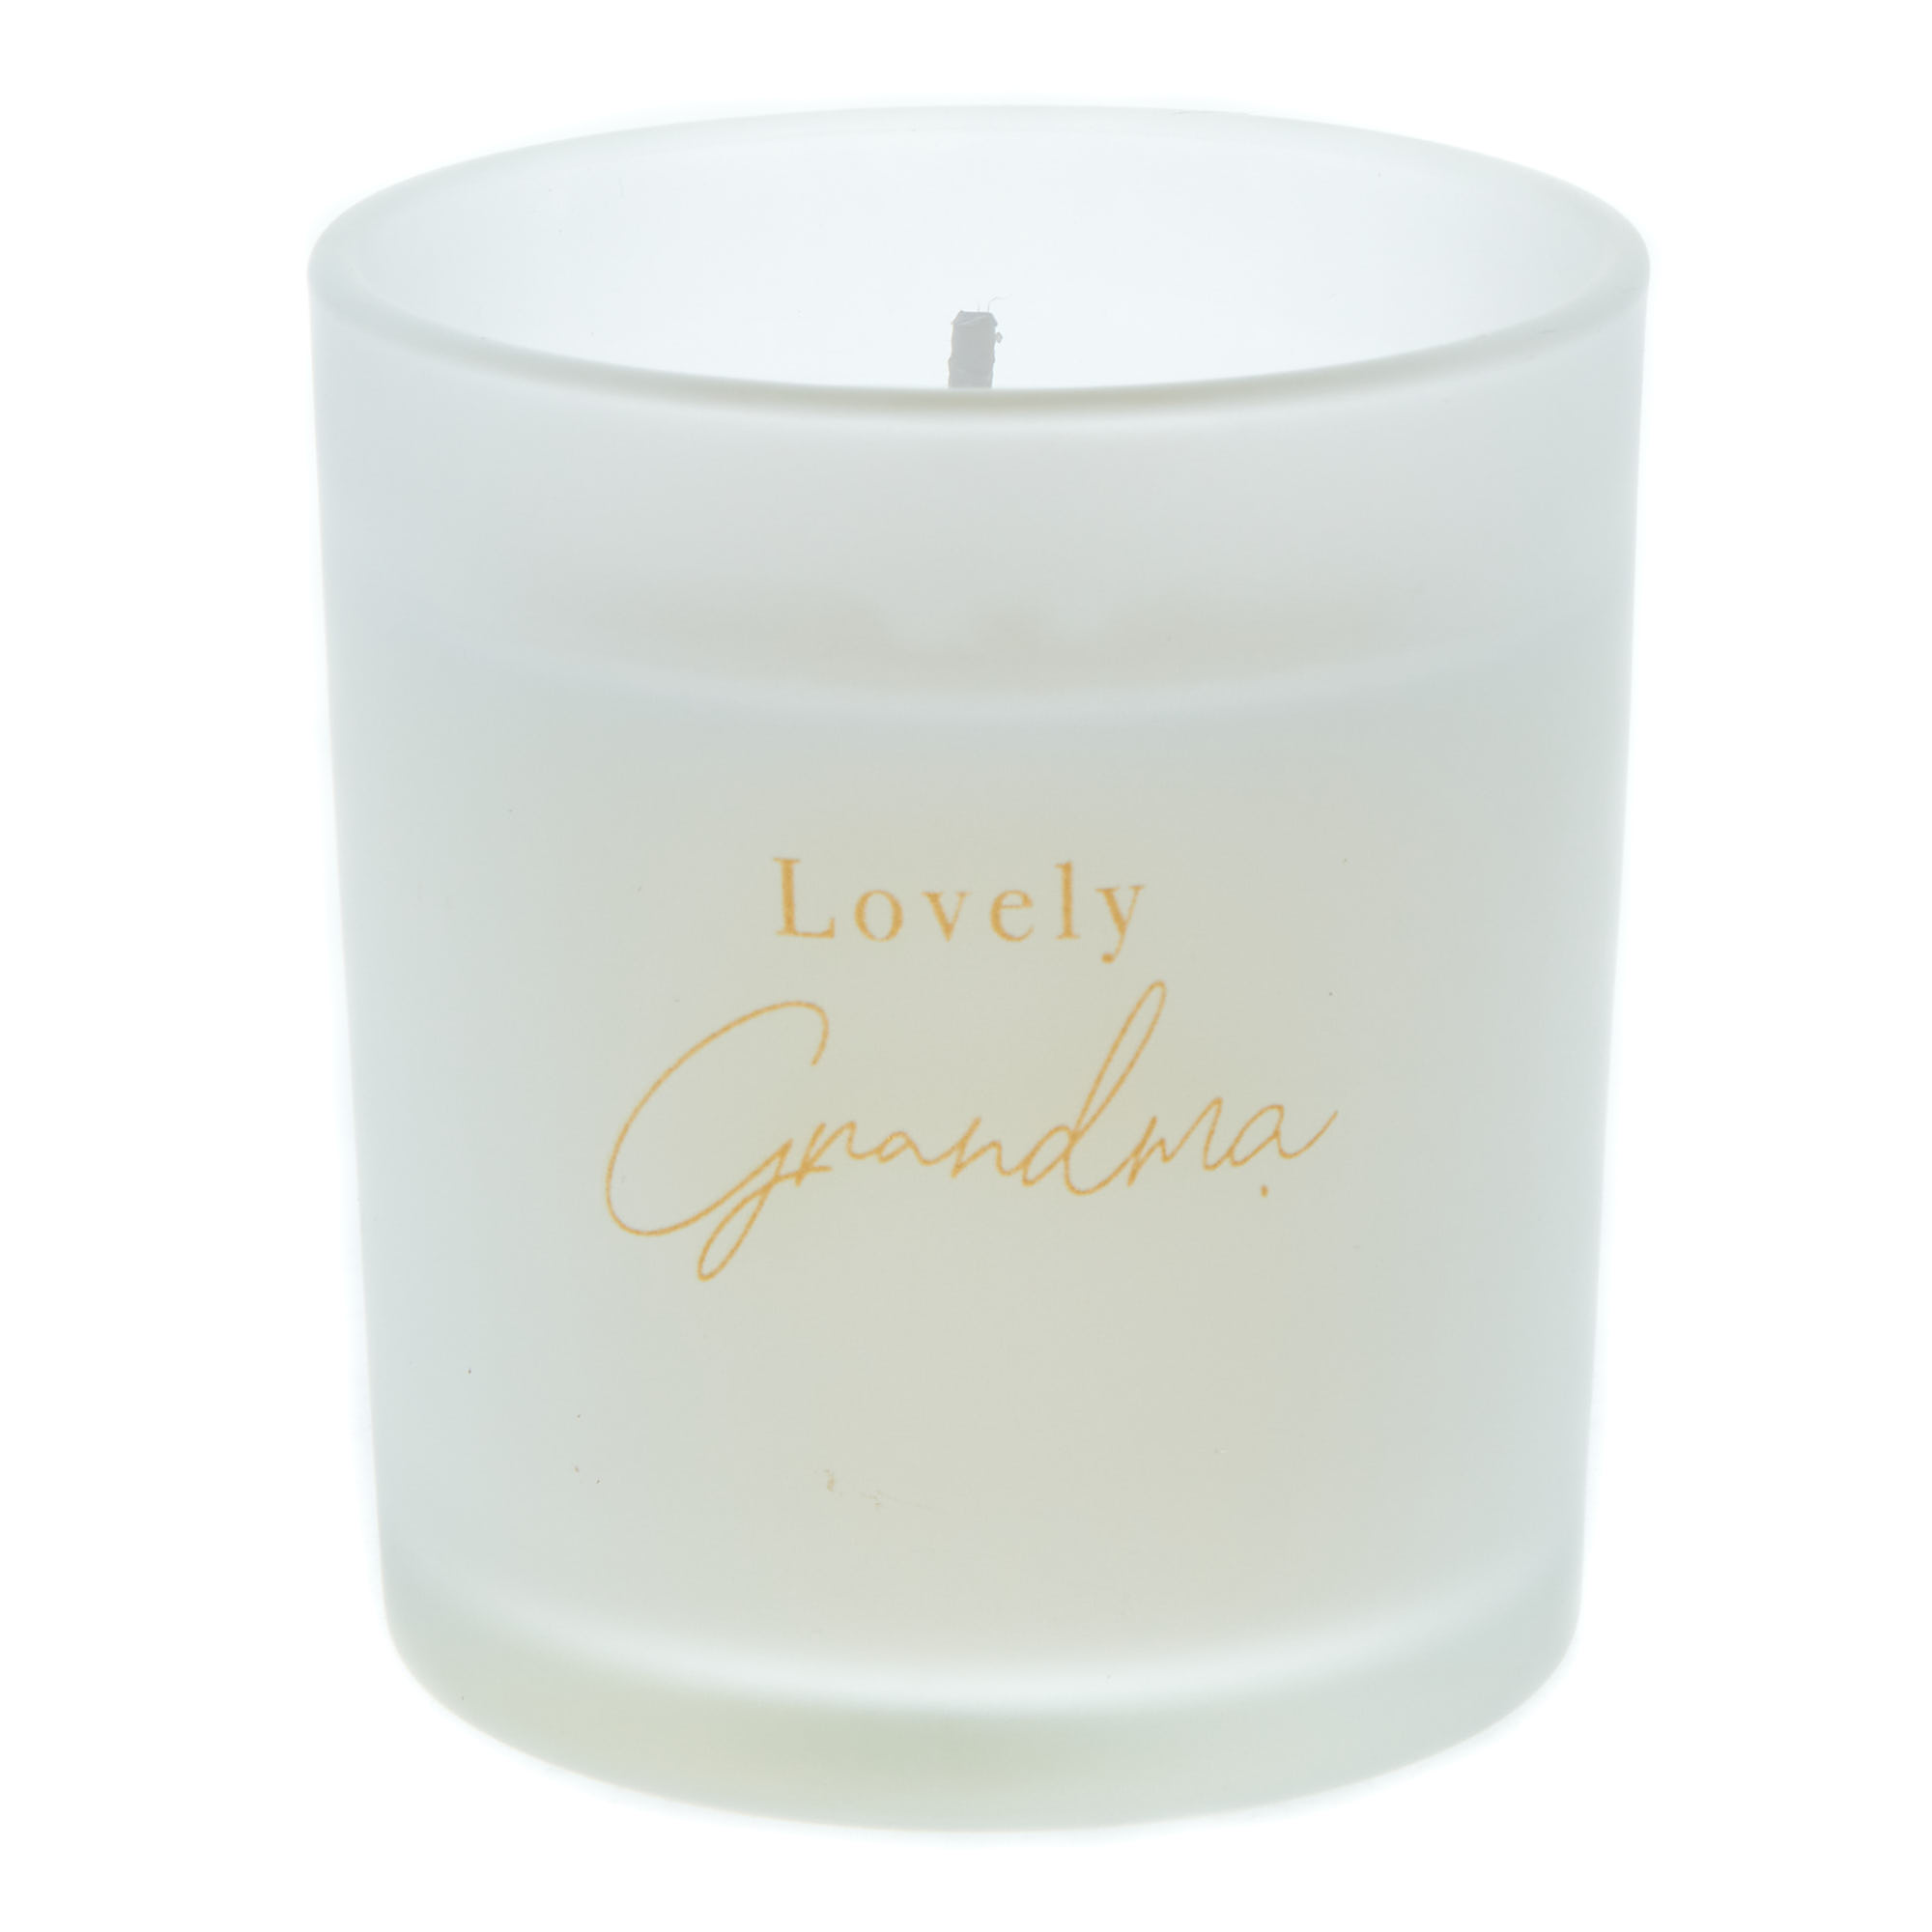 Lovely Grandma Warm Cashmere Scented Candle